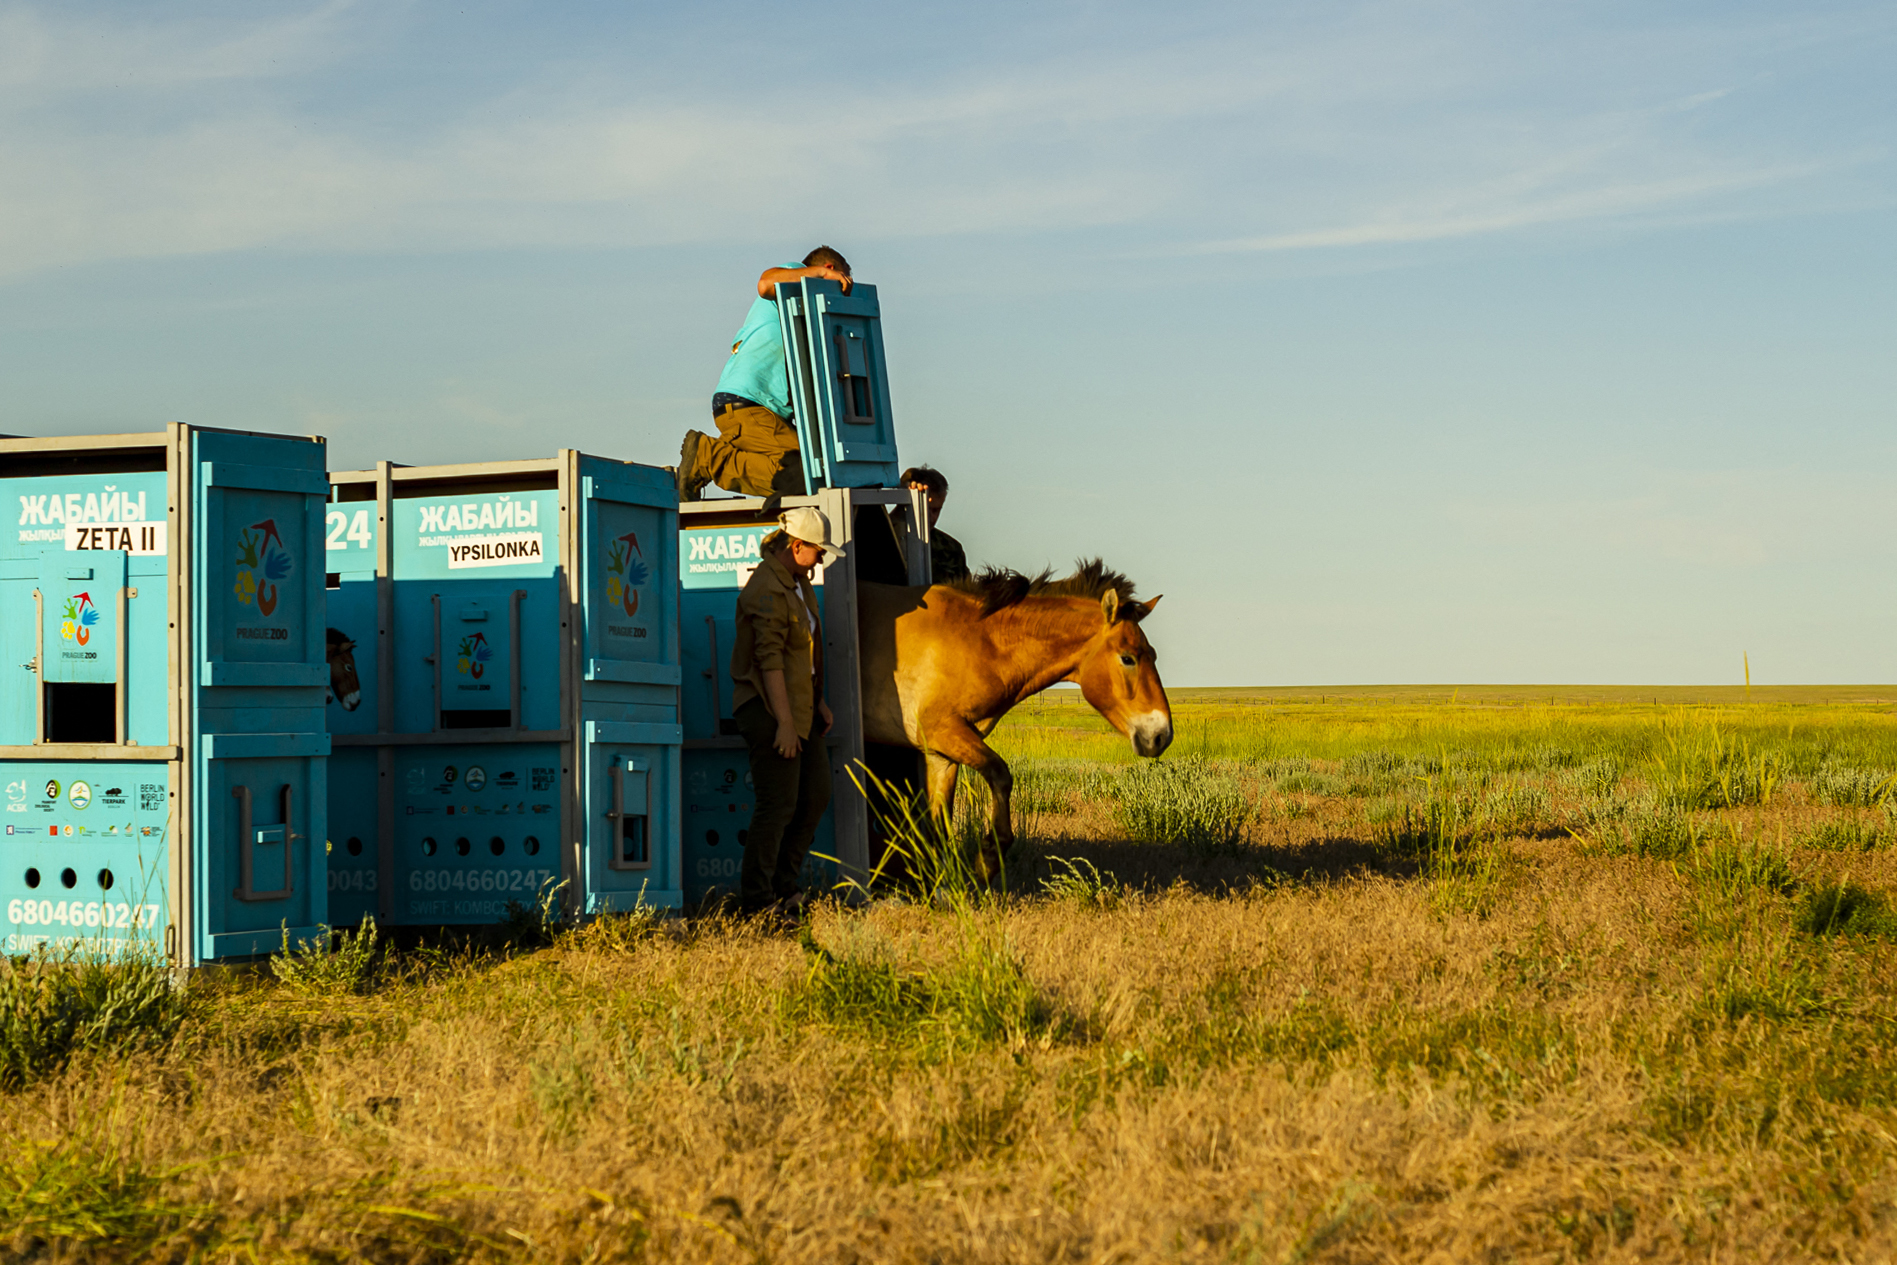 Wild horse species returns to the Kazakh steppes